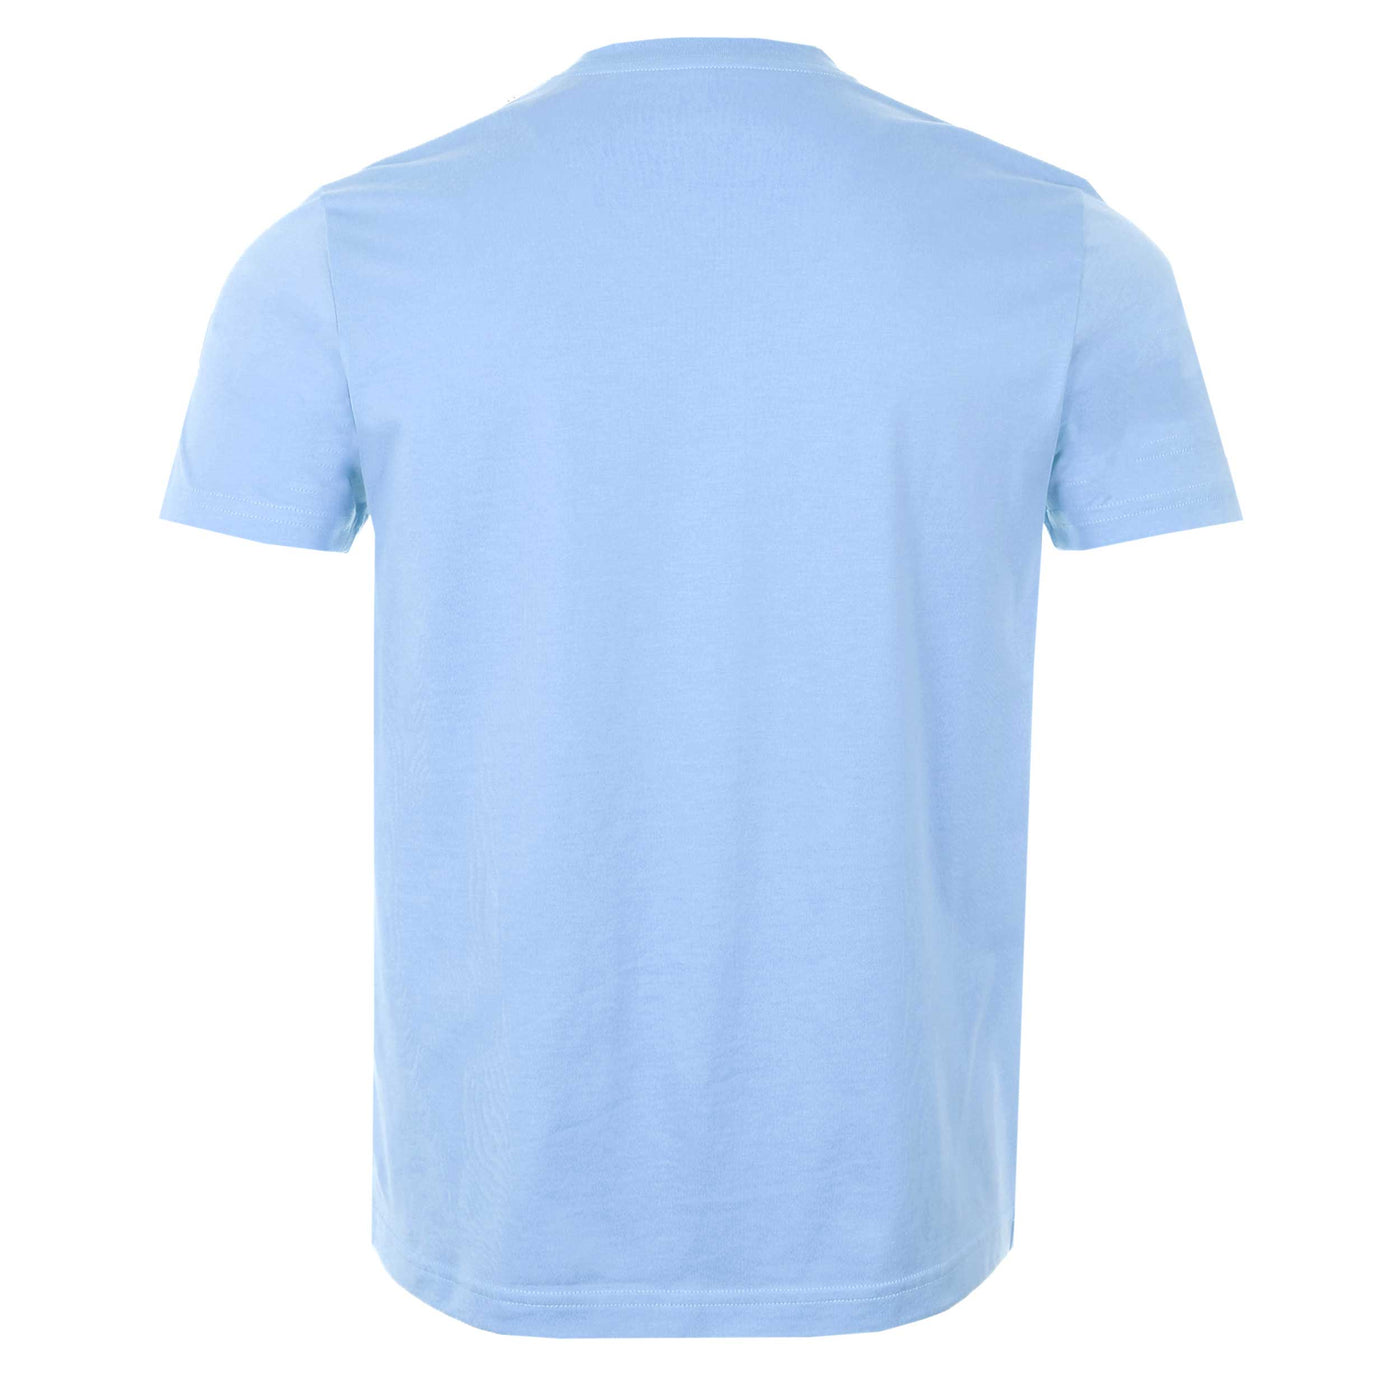 Psycho Bunny Classic T-Shirt in Serenity Sky Blue Back